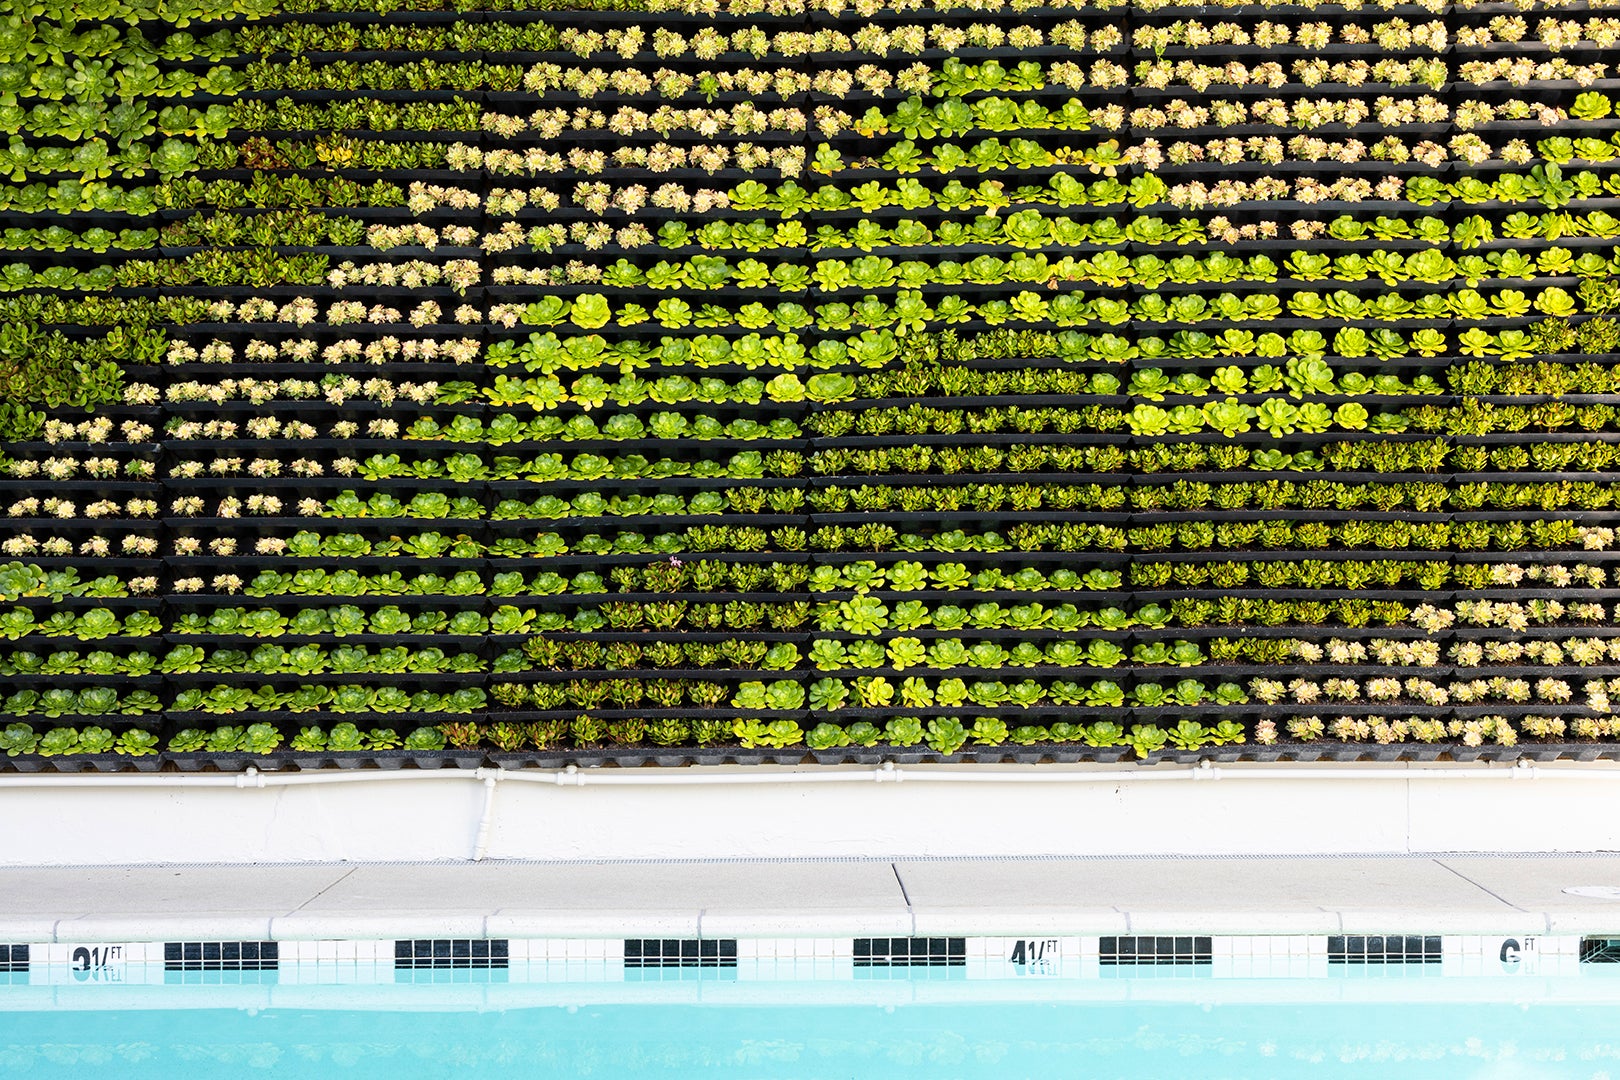 Wall of succulents next to the outdoor pool